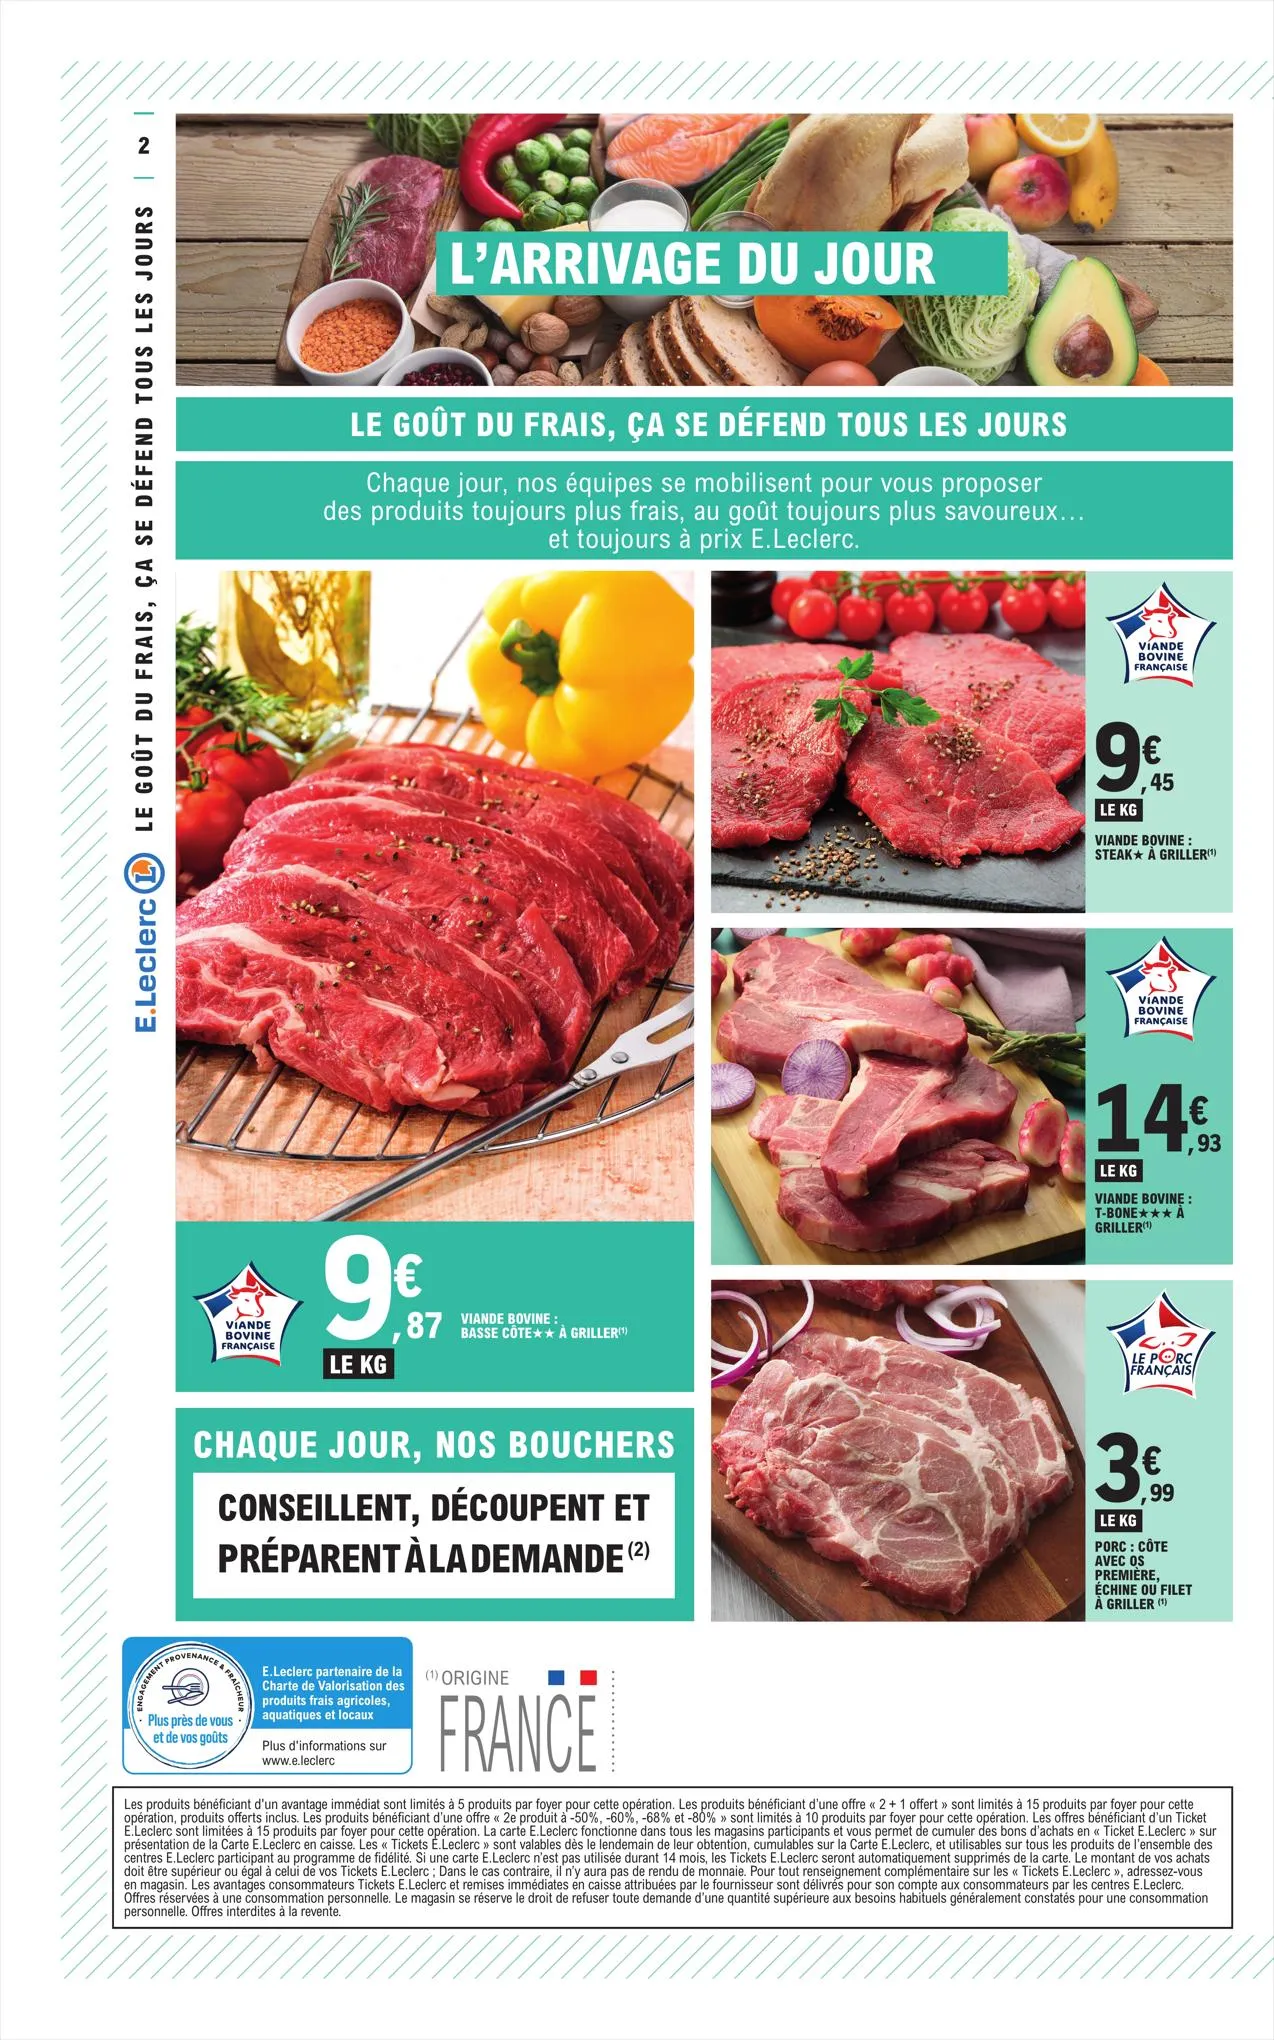 Catalogue Relance Alimentaire 10 - Mixte, page 00002